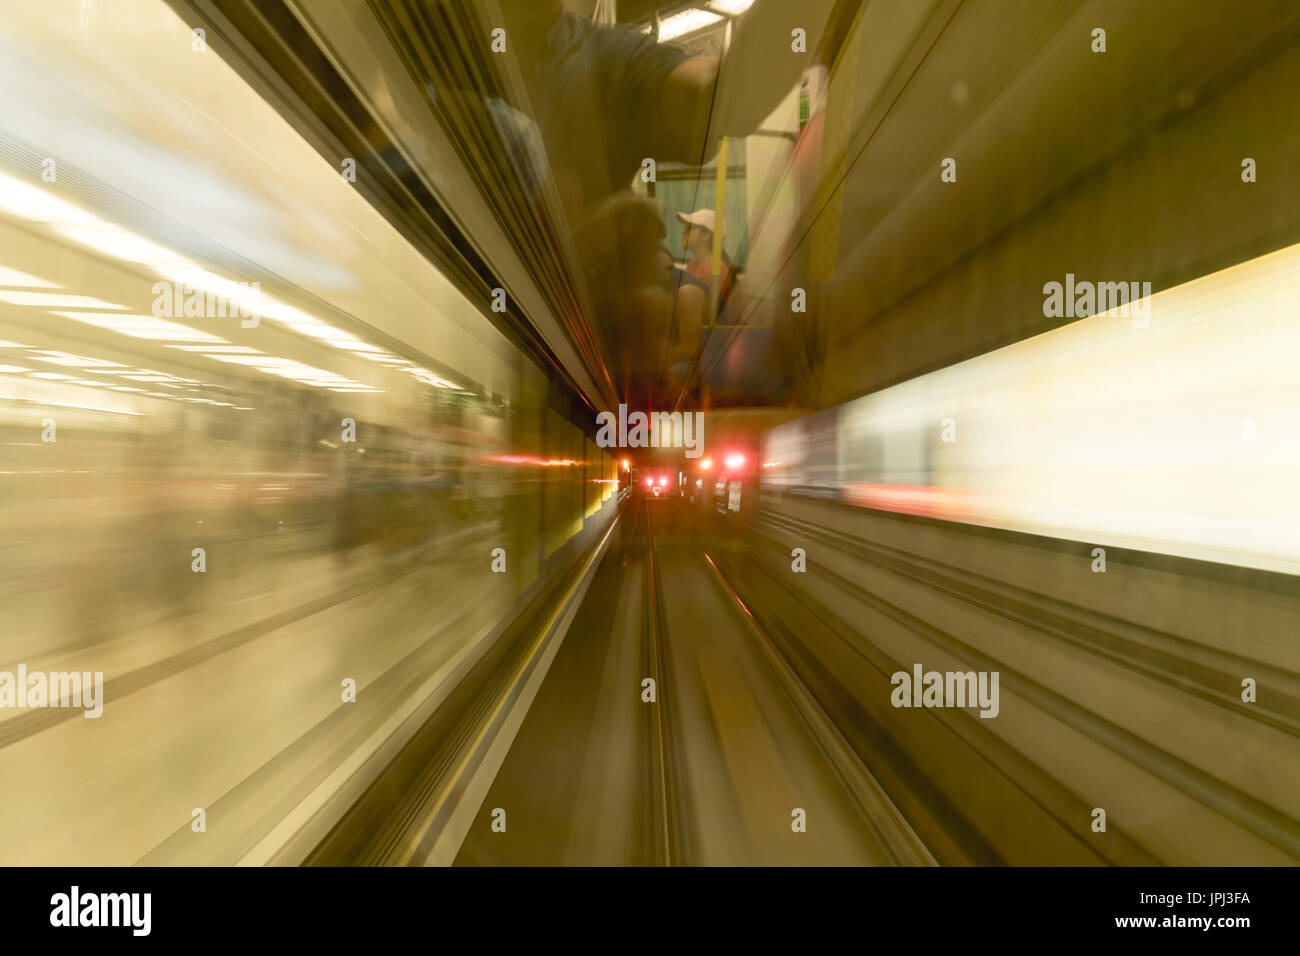 Metro train arriving at subway station in a blur of motion Stock Photo